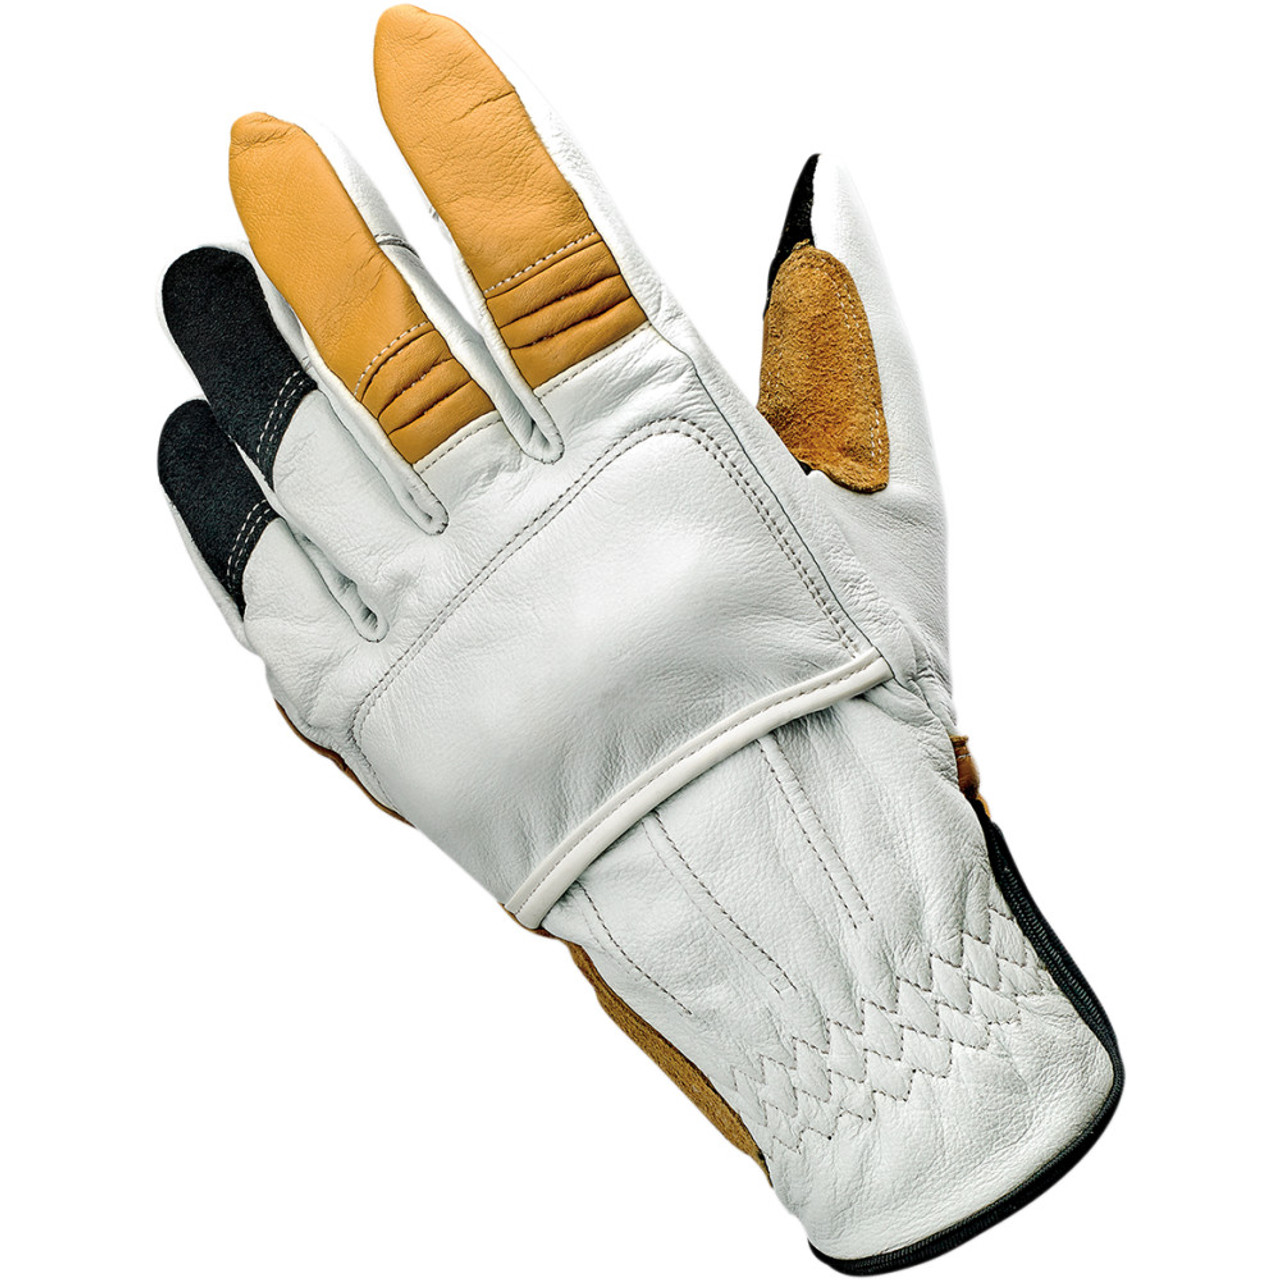 Biltwell Work Gloves - Get Lowered Cycles